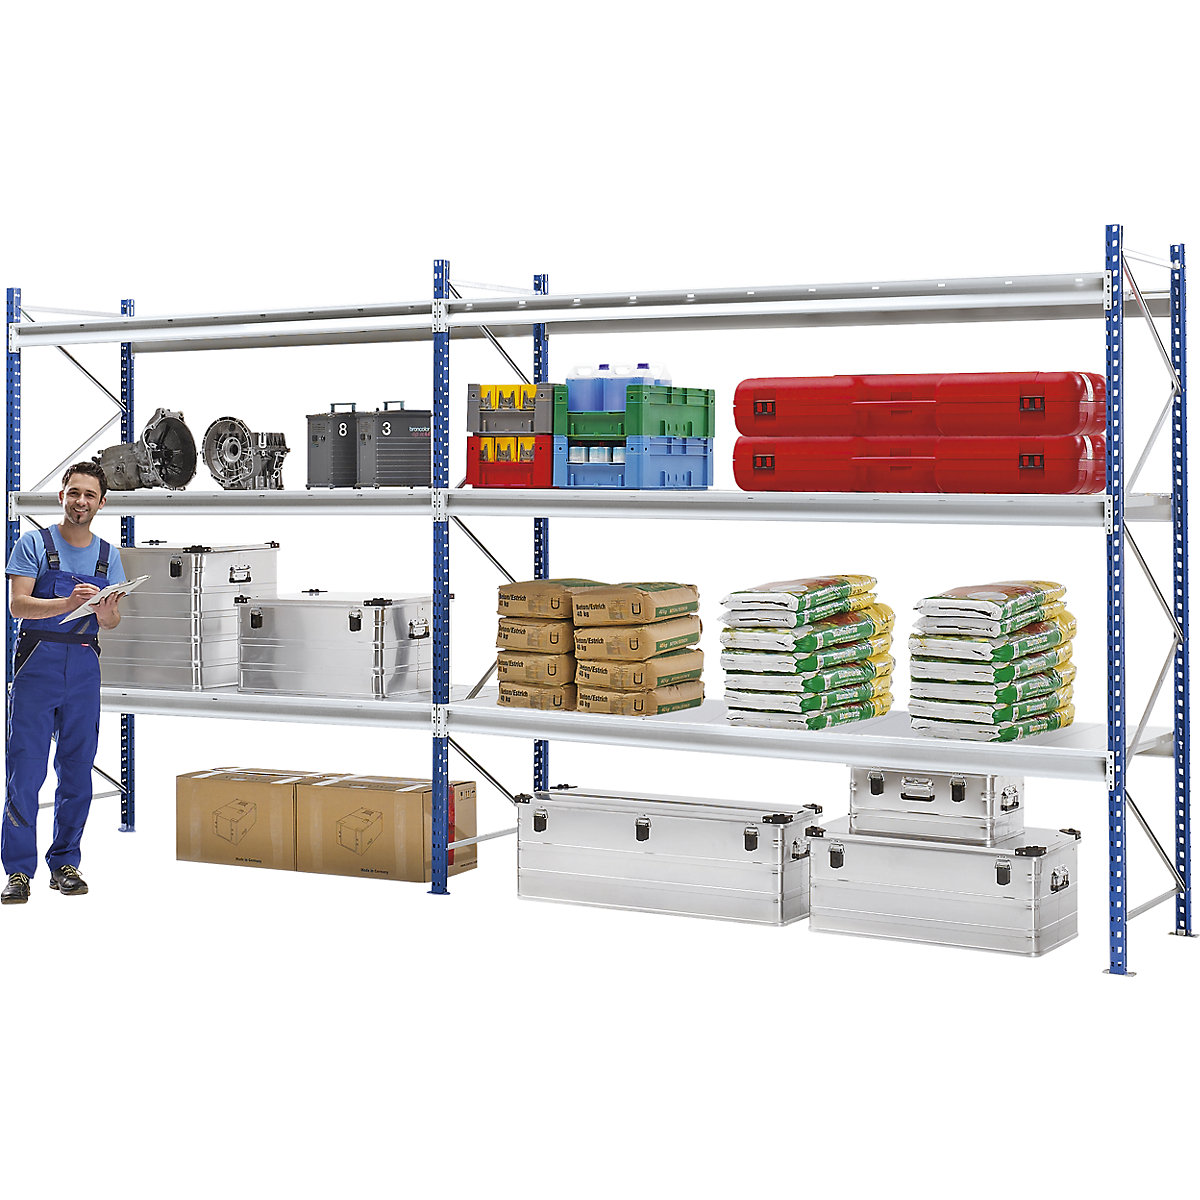 Heavy duty wide span shelving with mesh panel modules